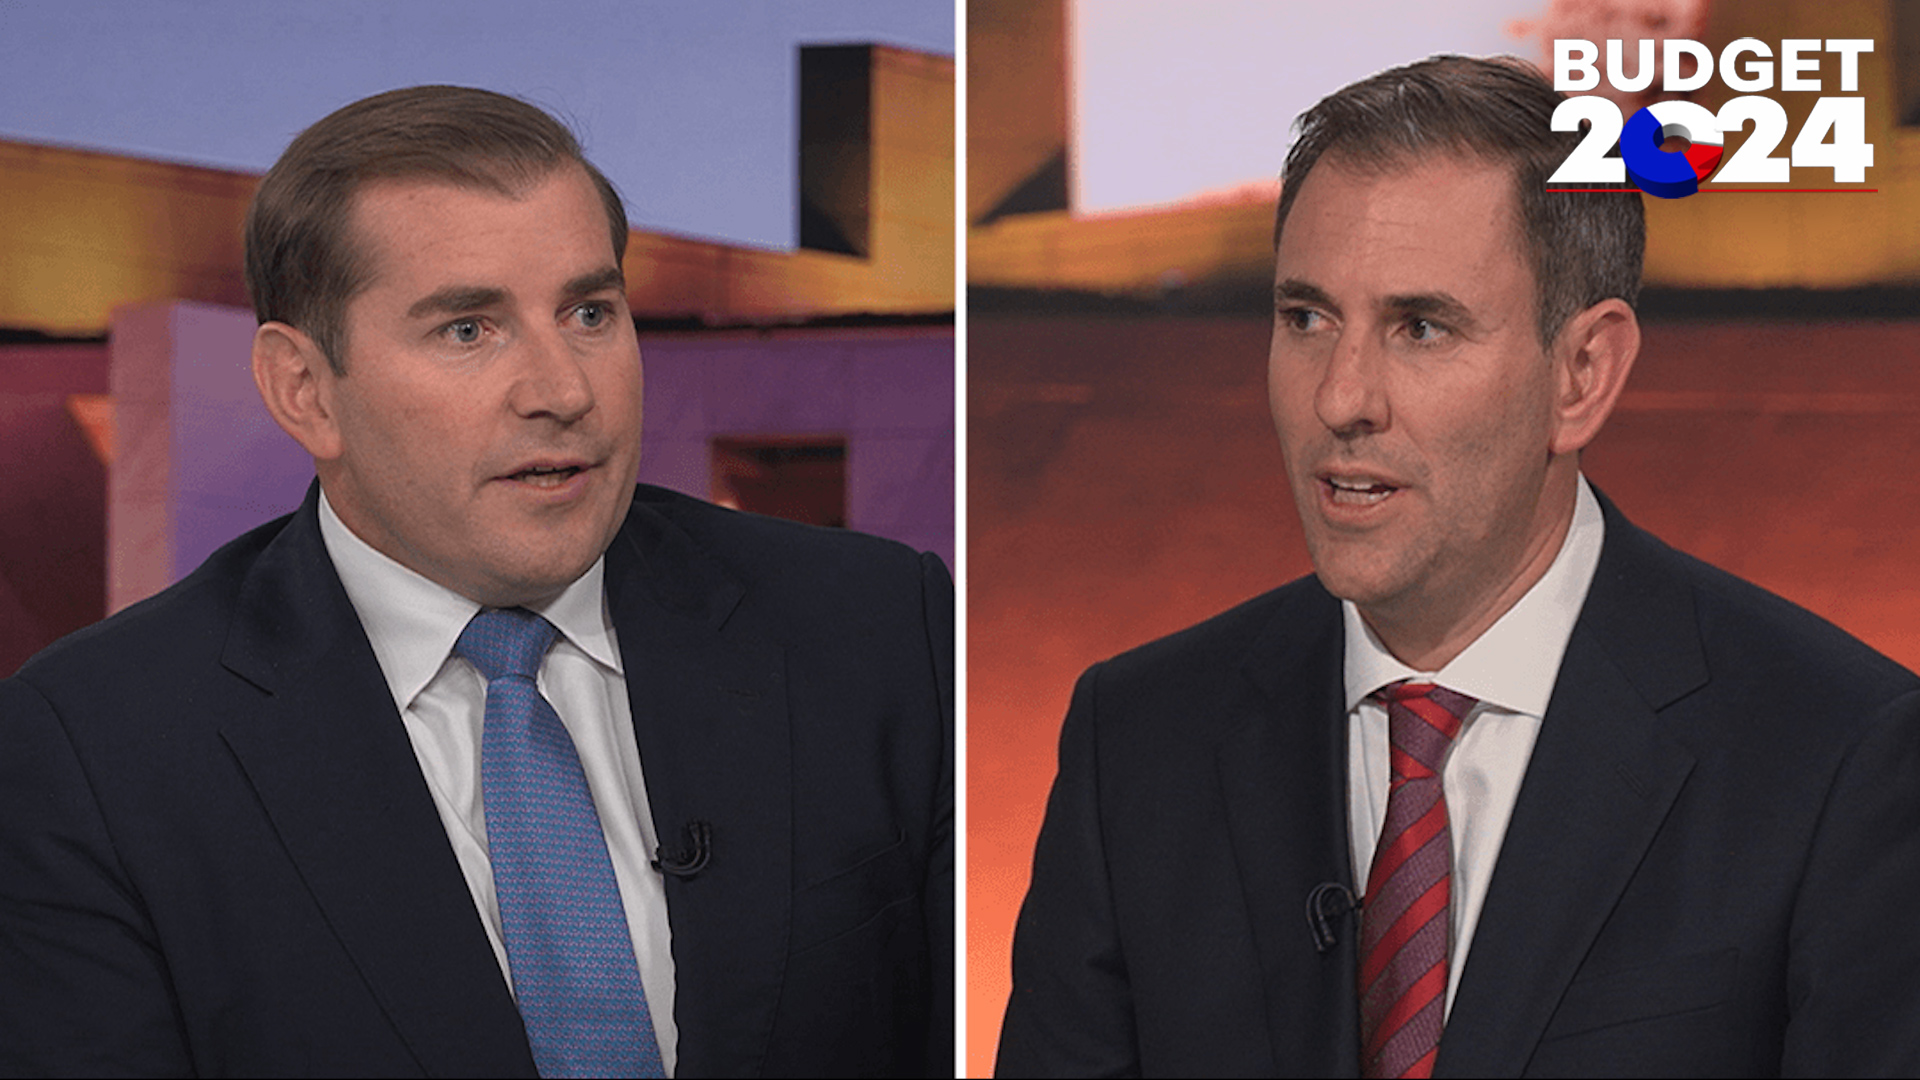 Charles Croucher sits down with Treasurer Jim Chalmers